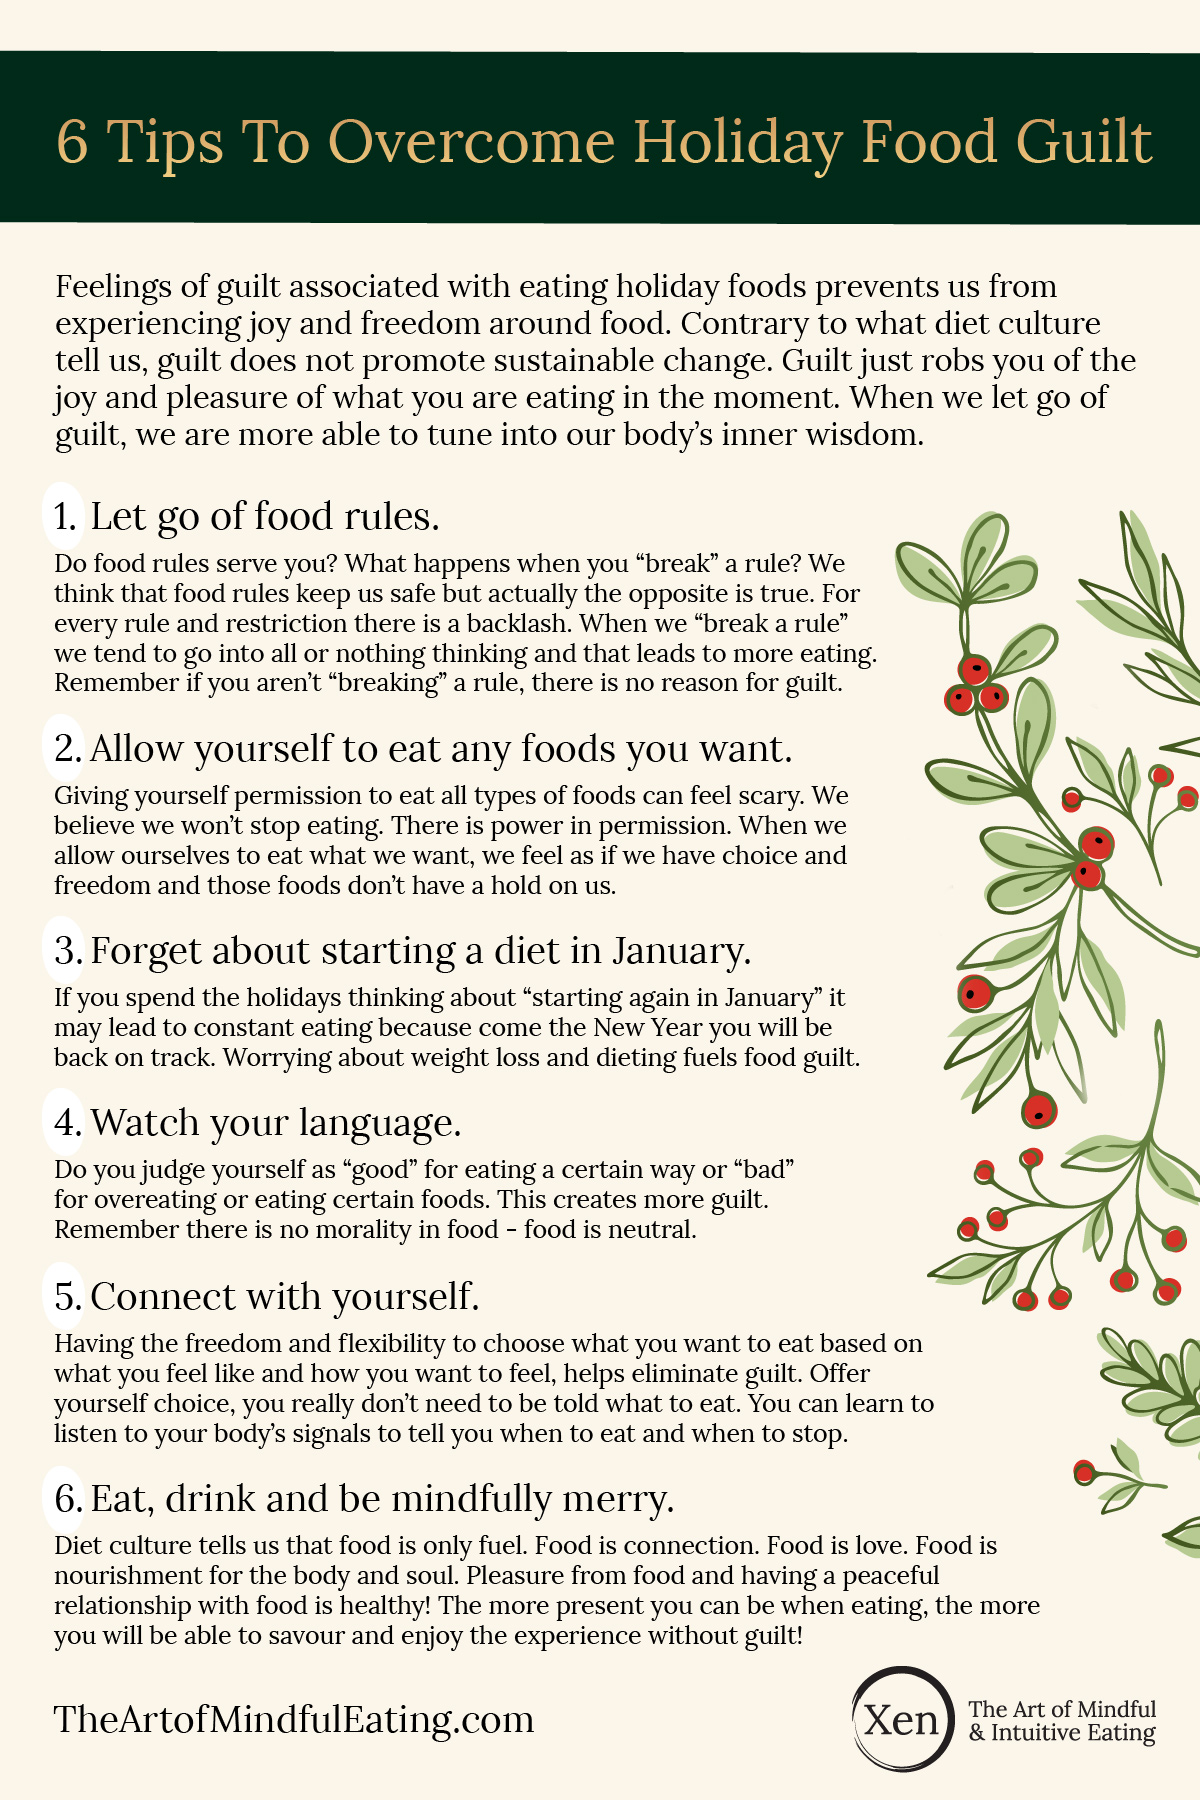 6 Tips To Overcome Holiday Food Guilt